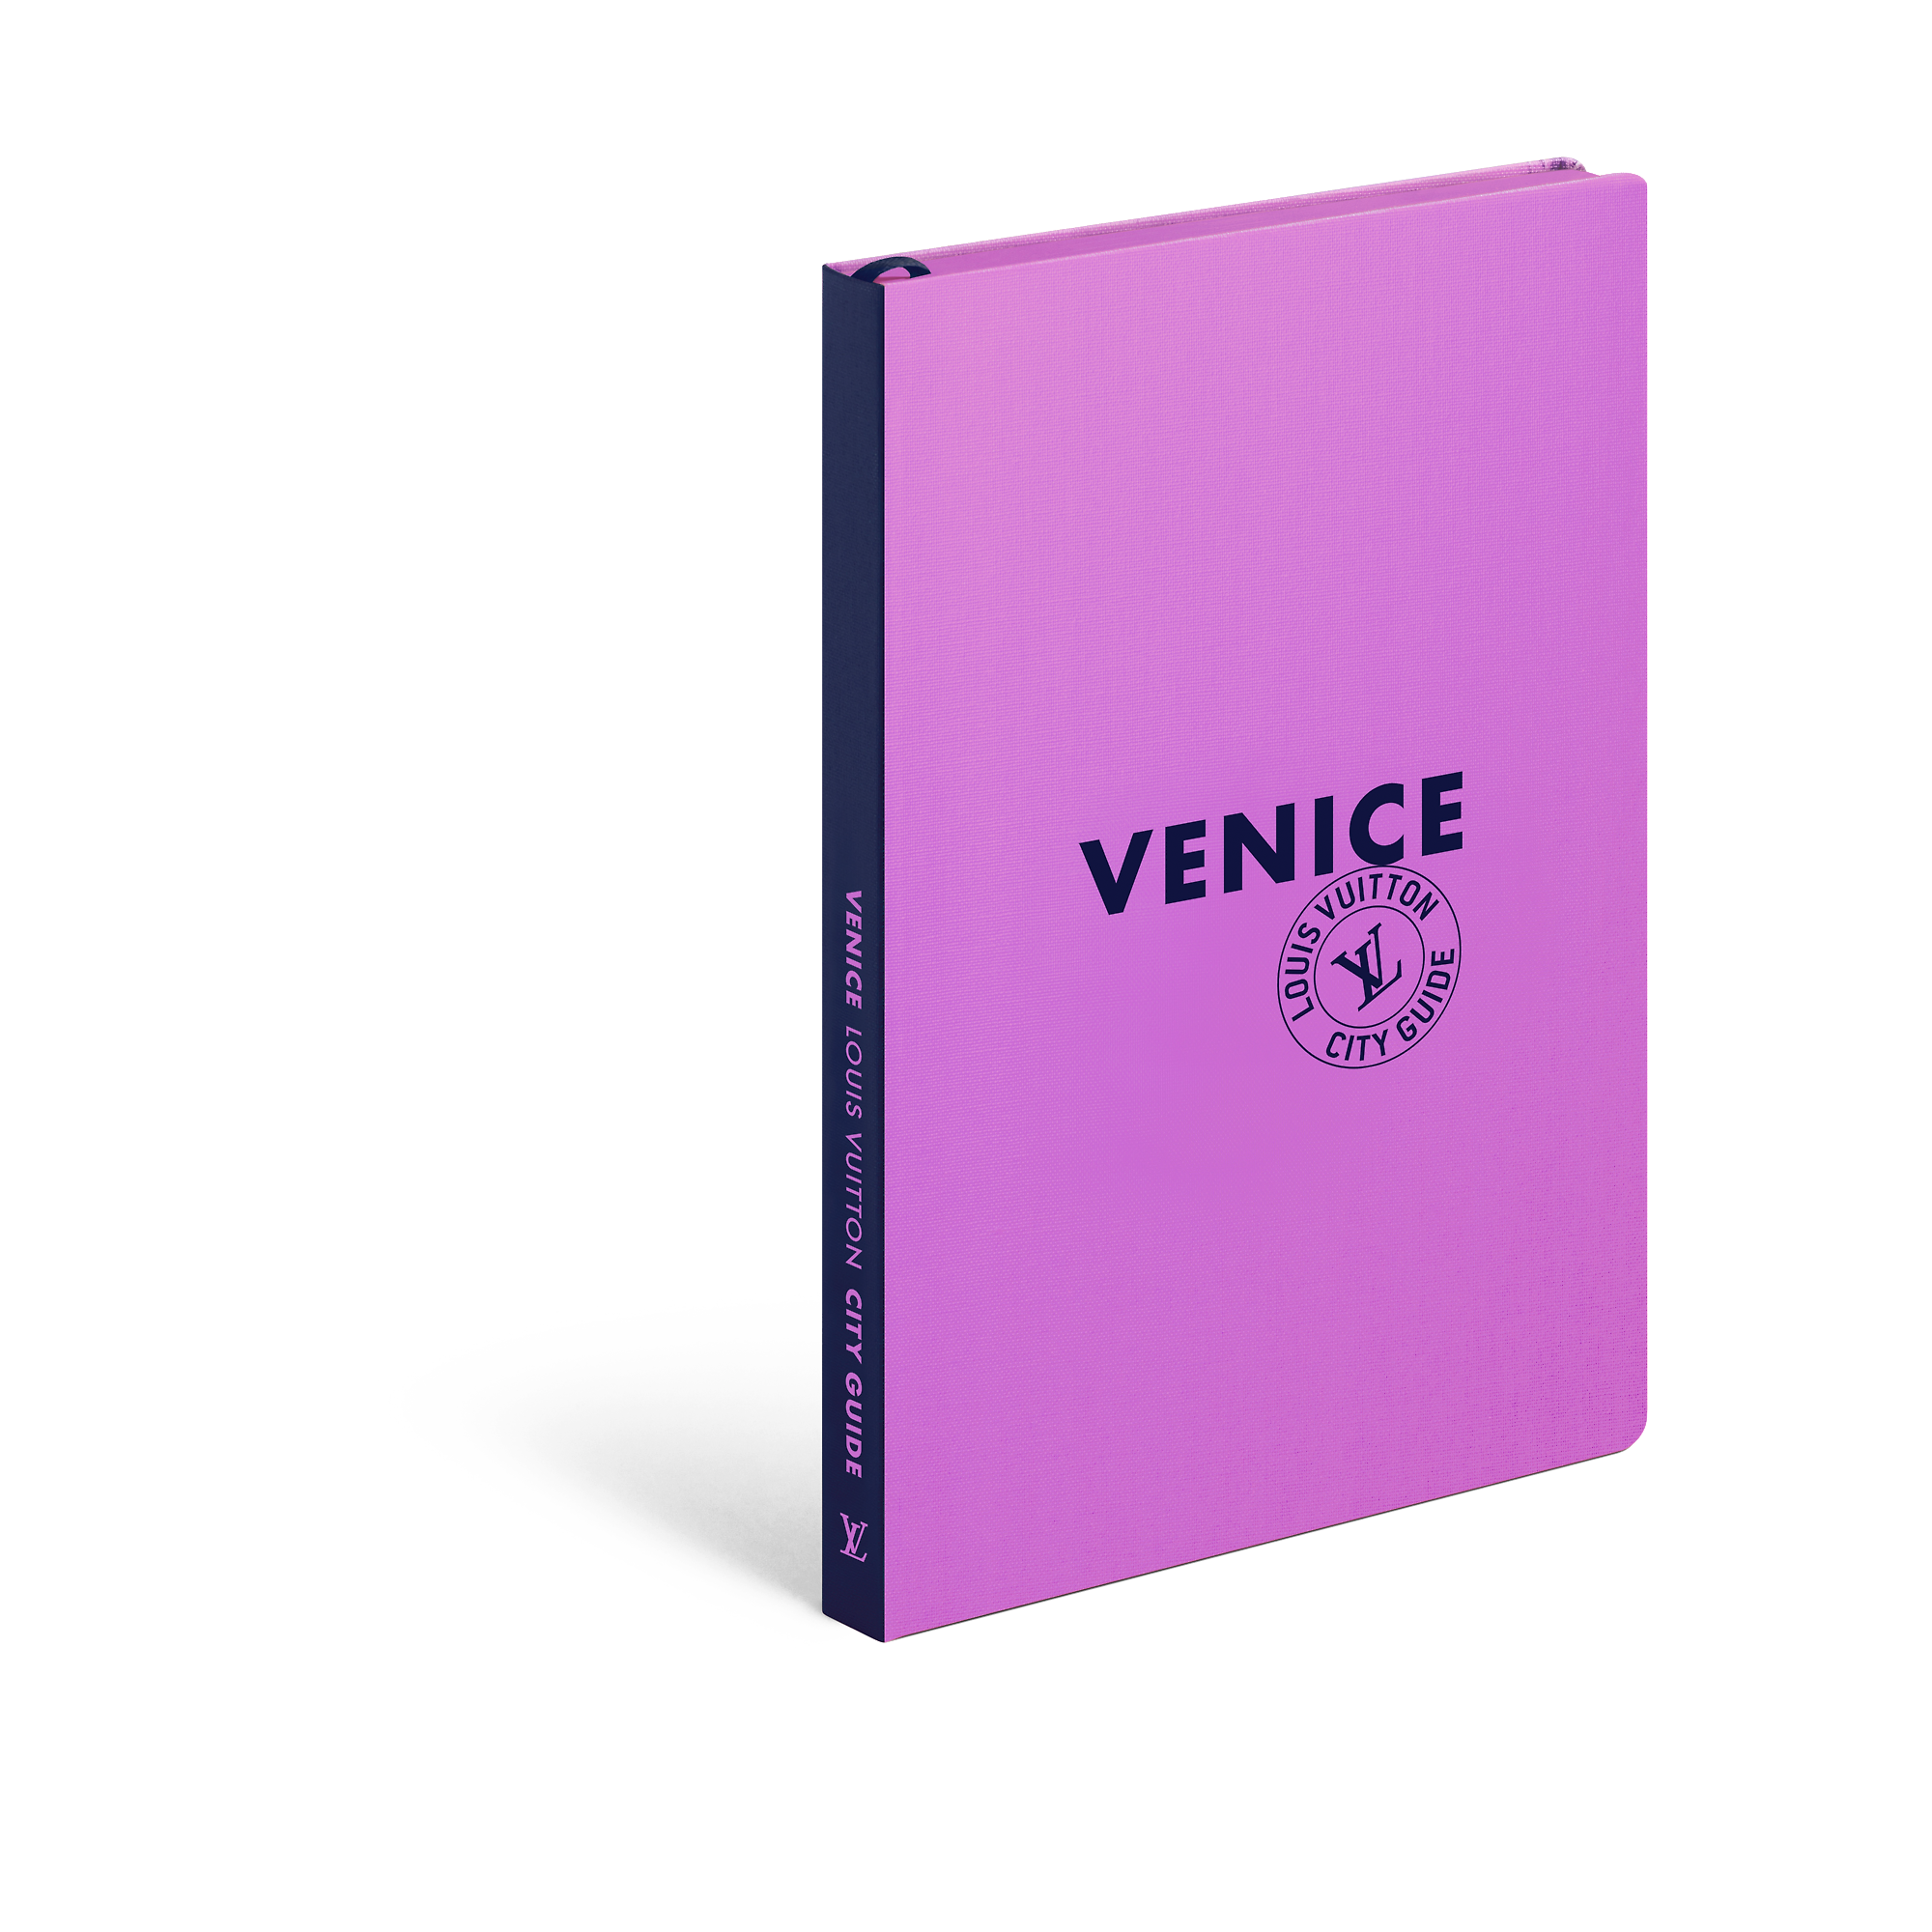 Louis Vuitton City Guide Venice, English Version – Art of Living – Books and Stationery R08993